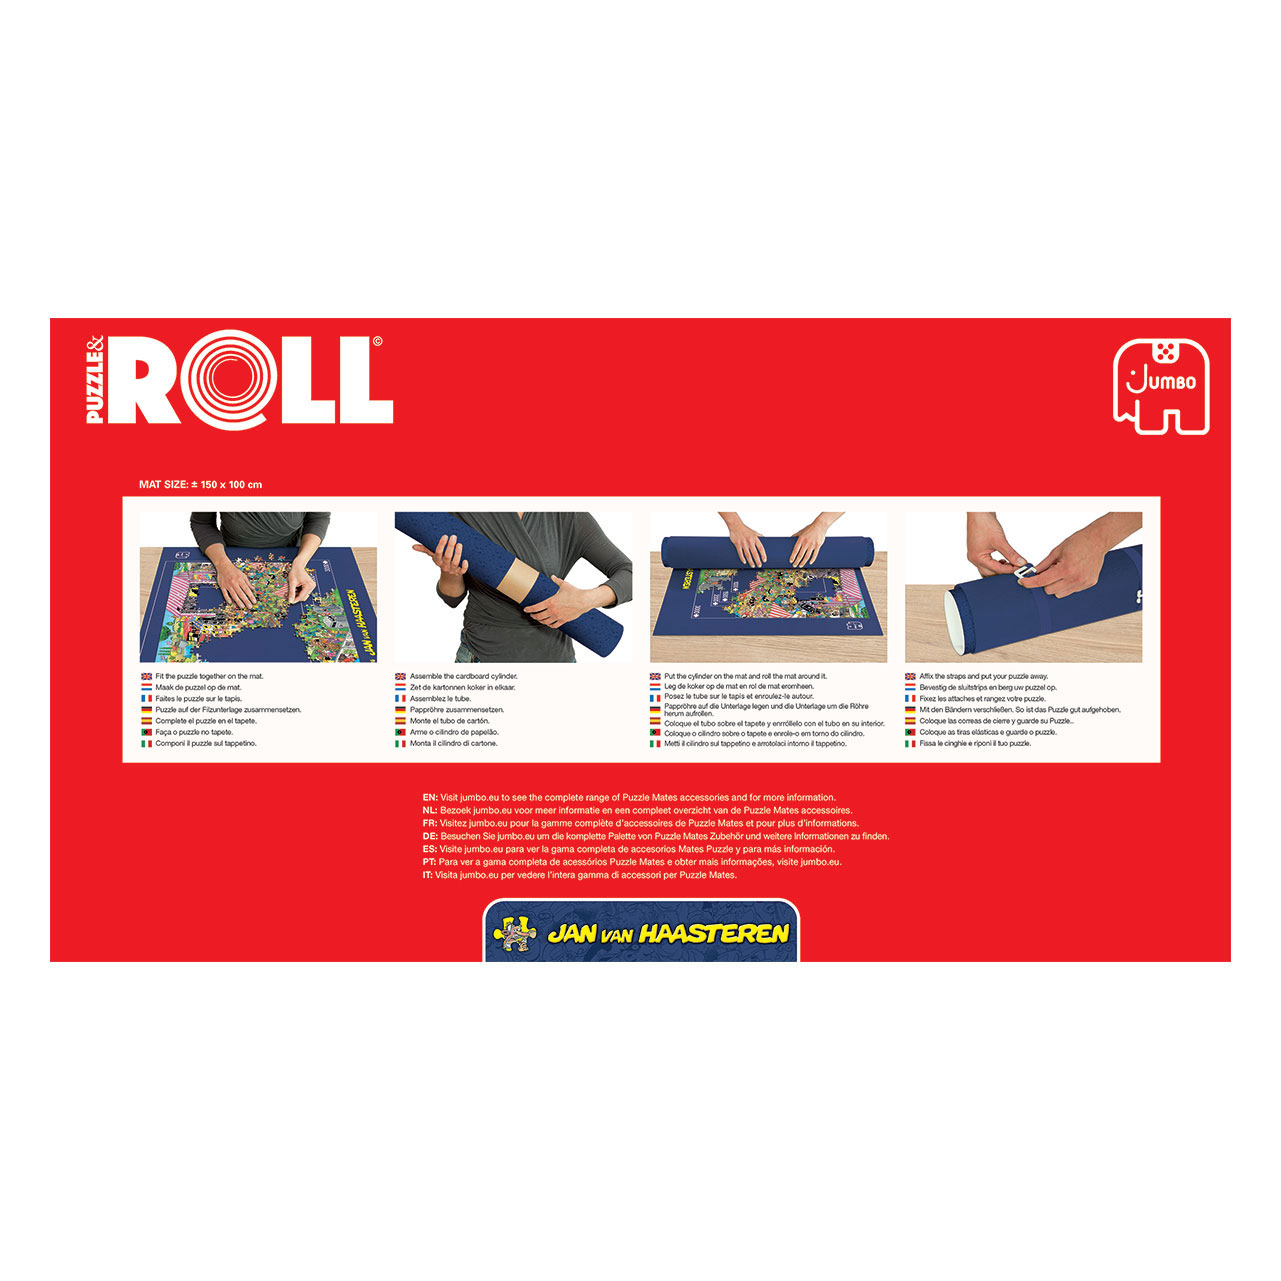 Puzzlematte Puzzle & Roll 500 - 1500 Teile (Jumbo)